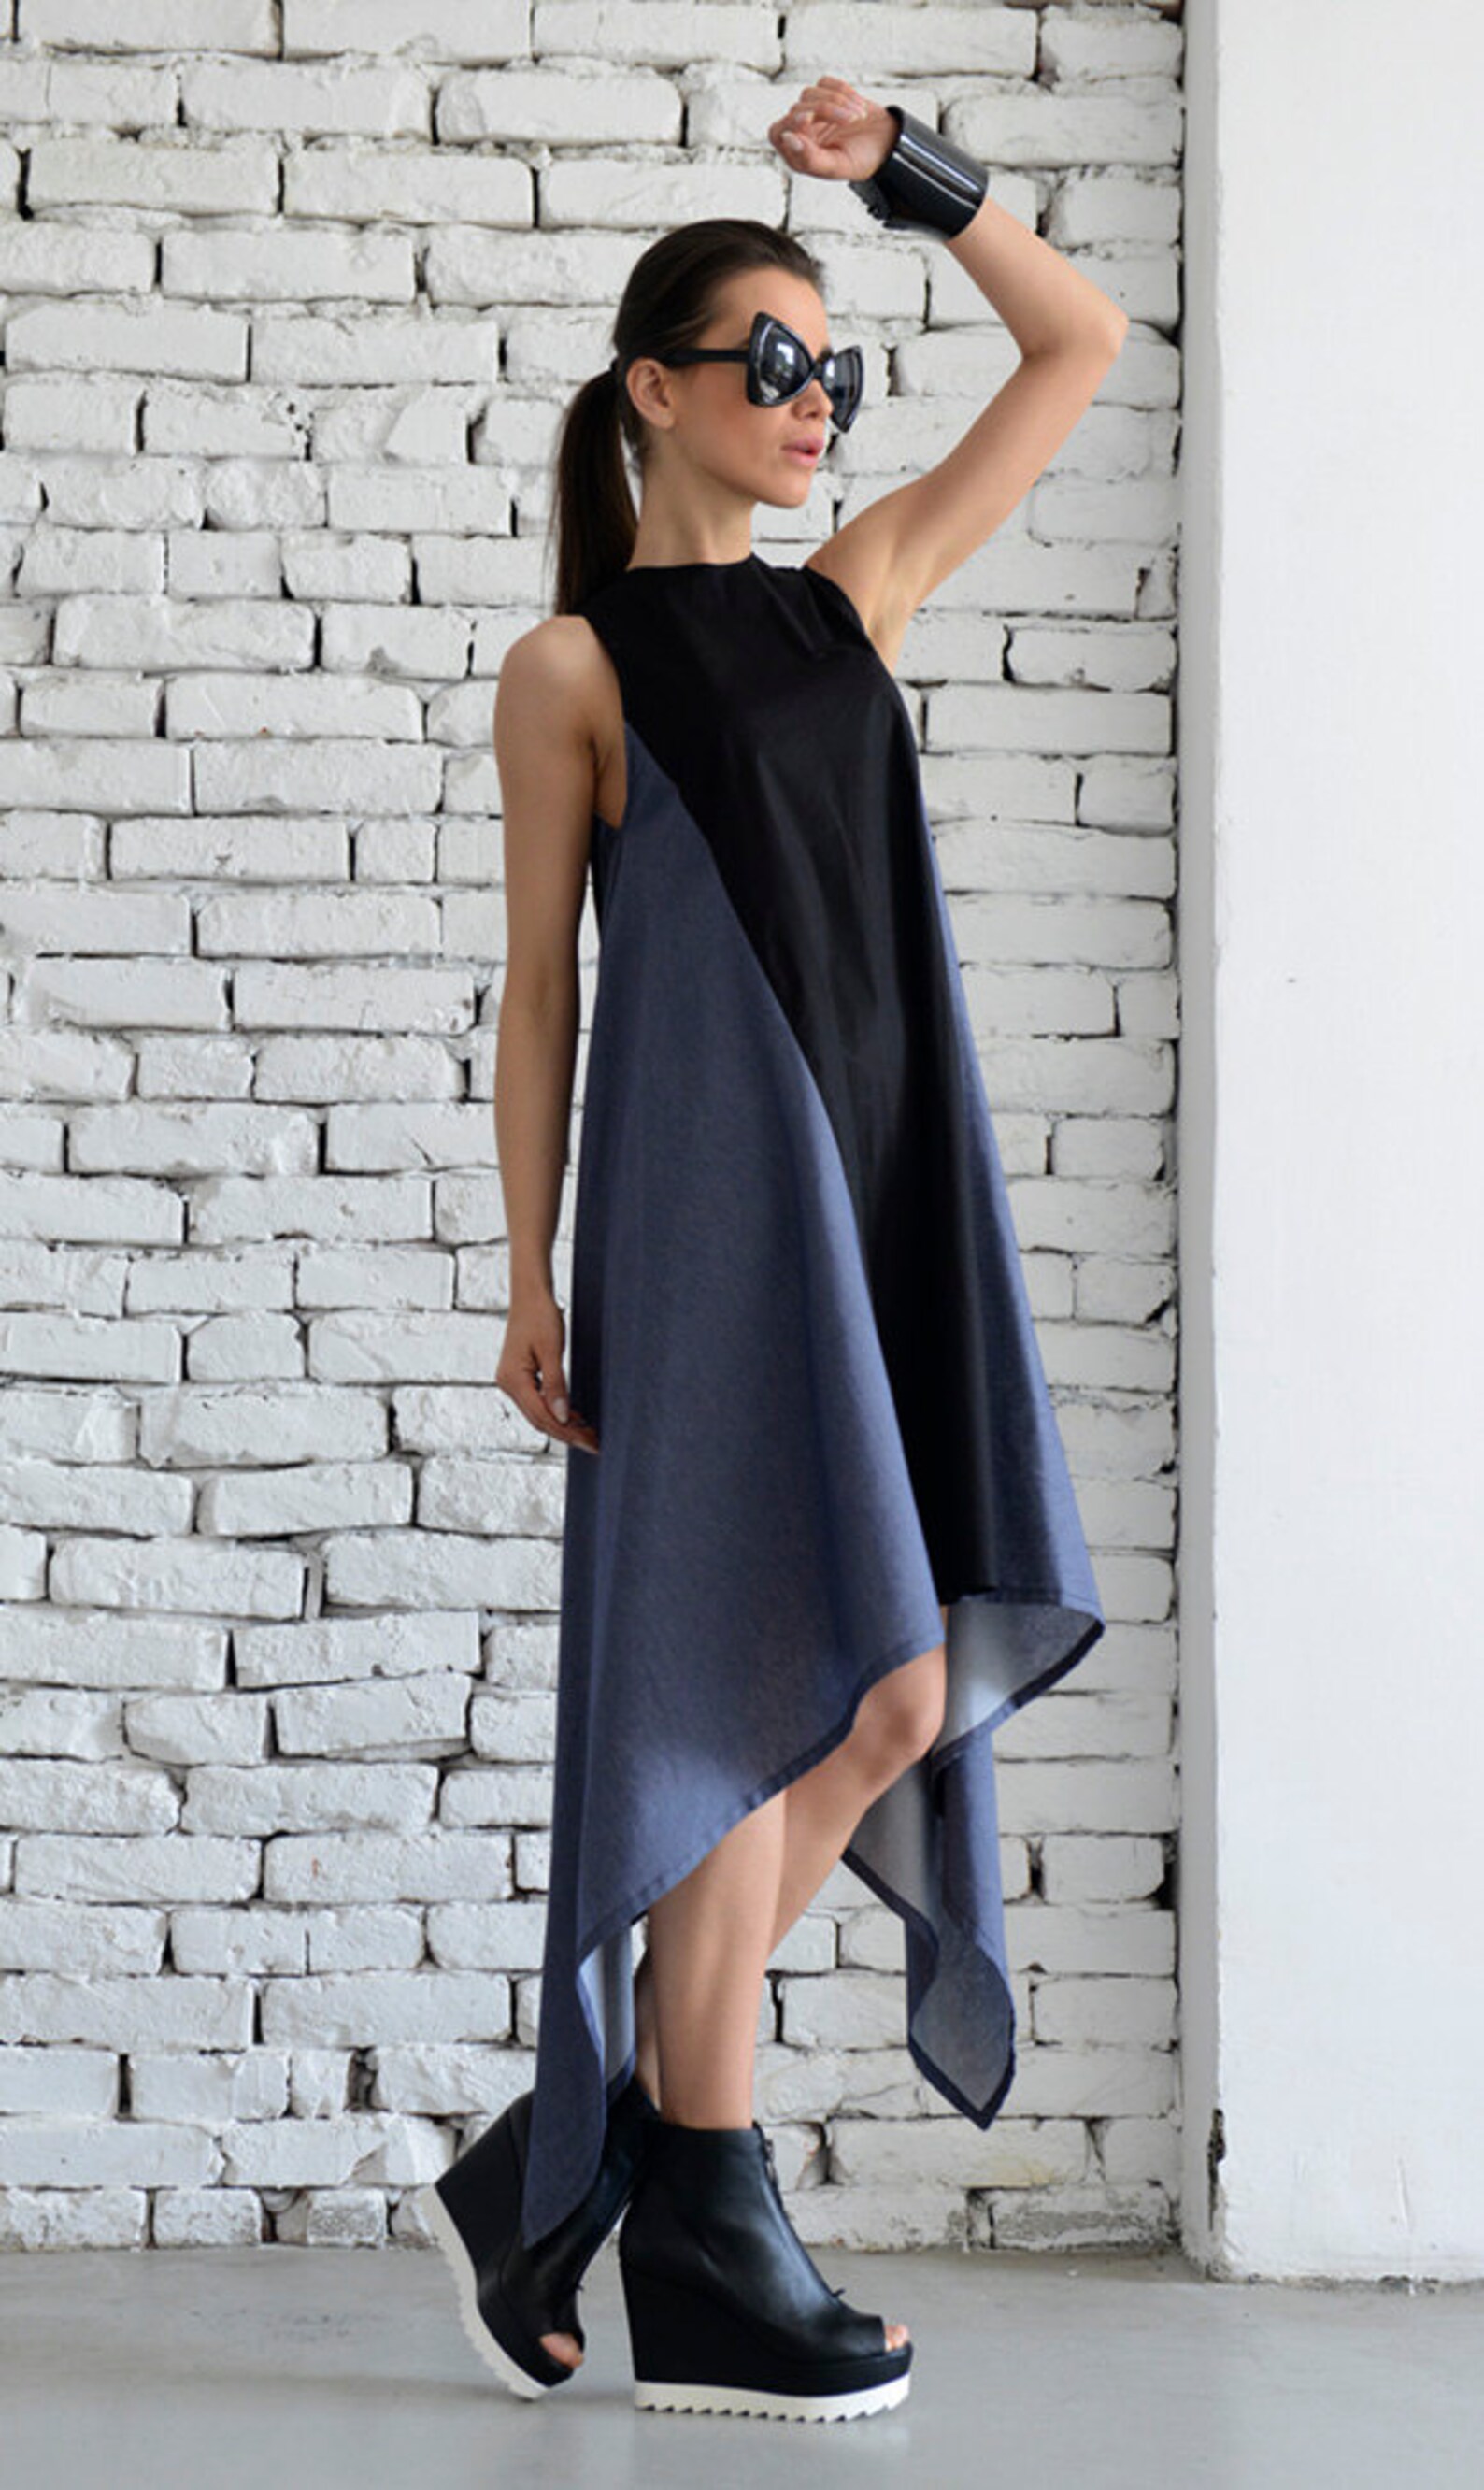 Sexy Asymmetrical Two Color Spring Dress/Denim and Black Long | Etsy